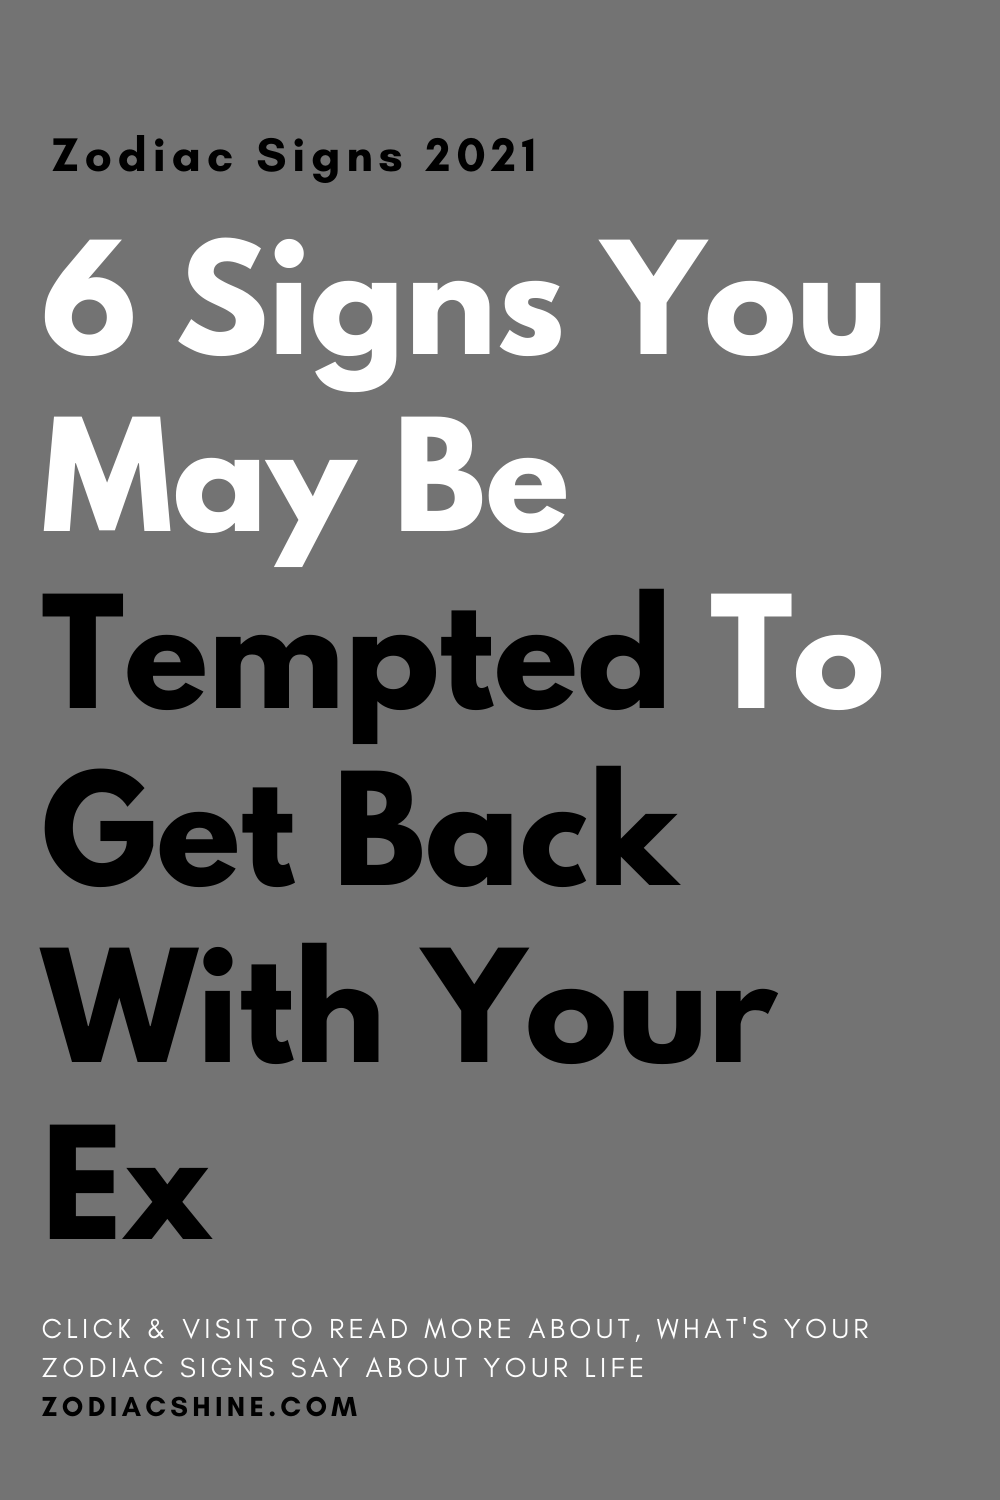 6 Signs You May Be Tempted To Get Back With Your Ex